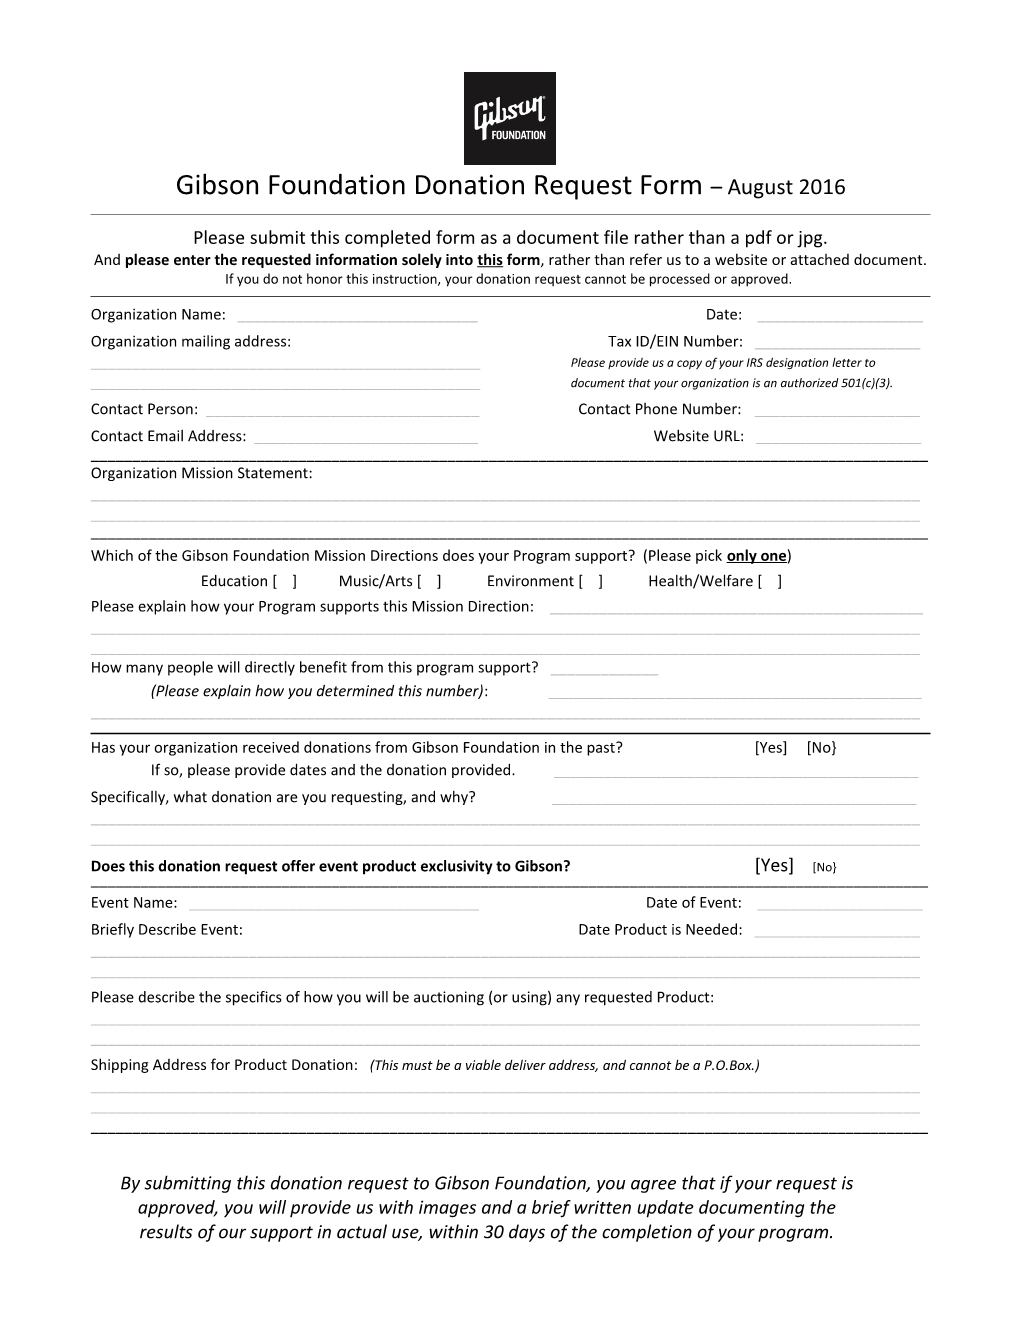 Please Submit This Completed Form As a Document File Rather Than a Pdf Or Jpg